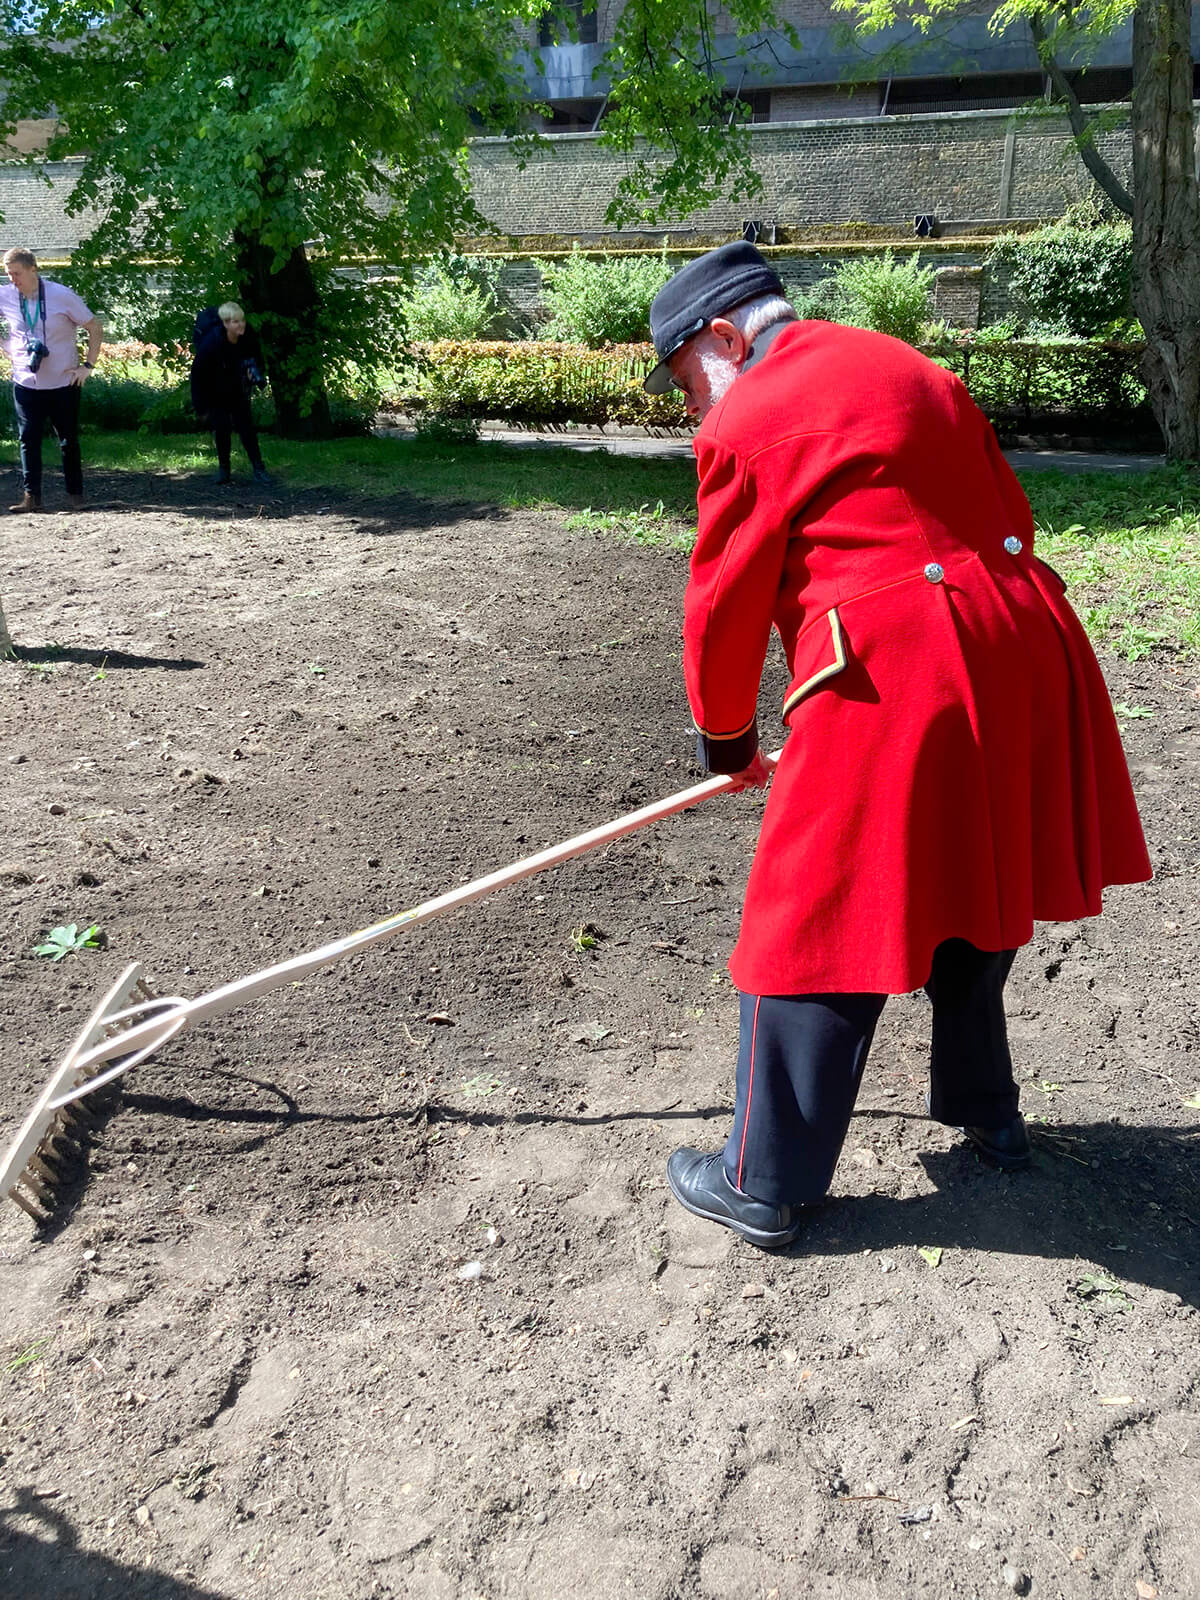 Chelsea Pensioners Preparing the Ground for Sowing the Seeds